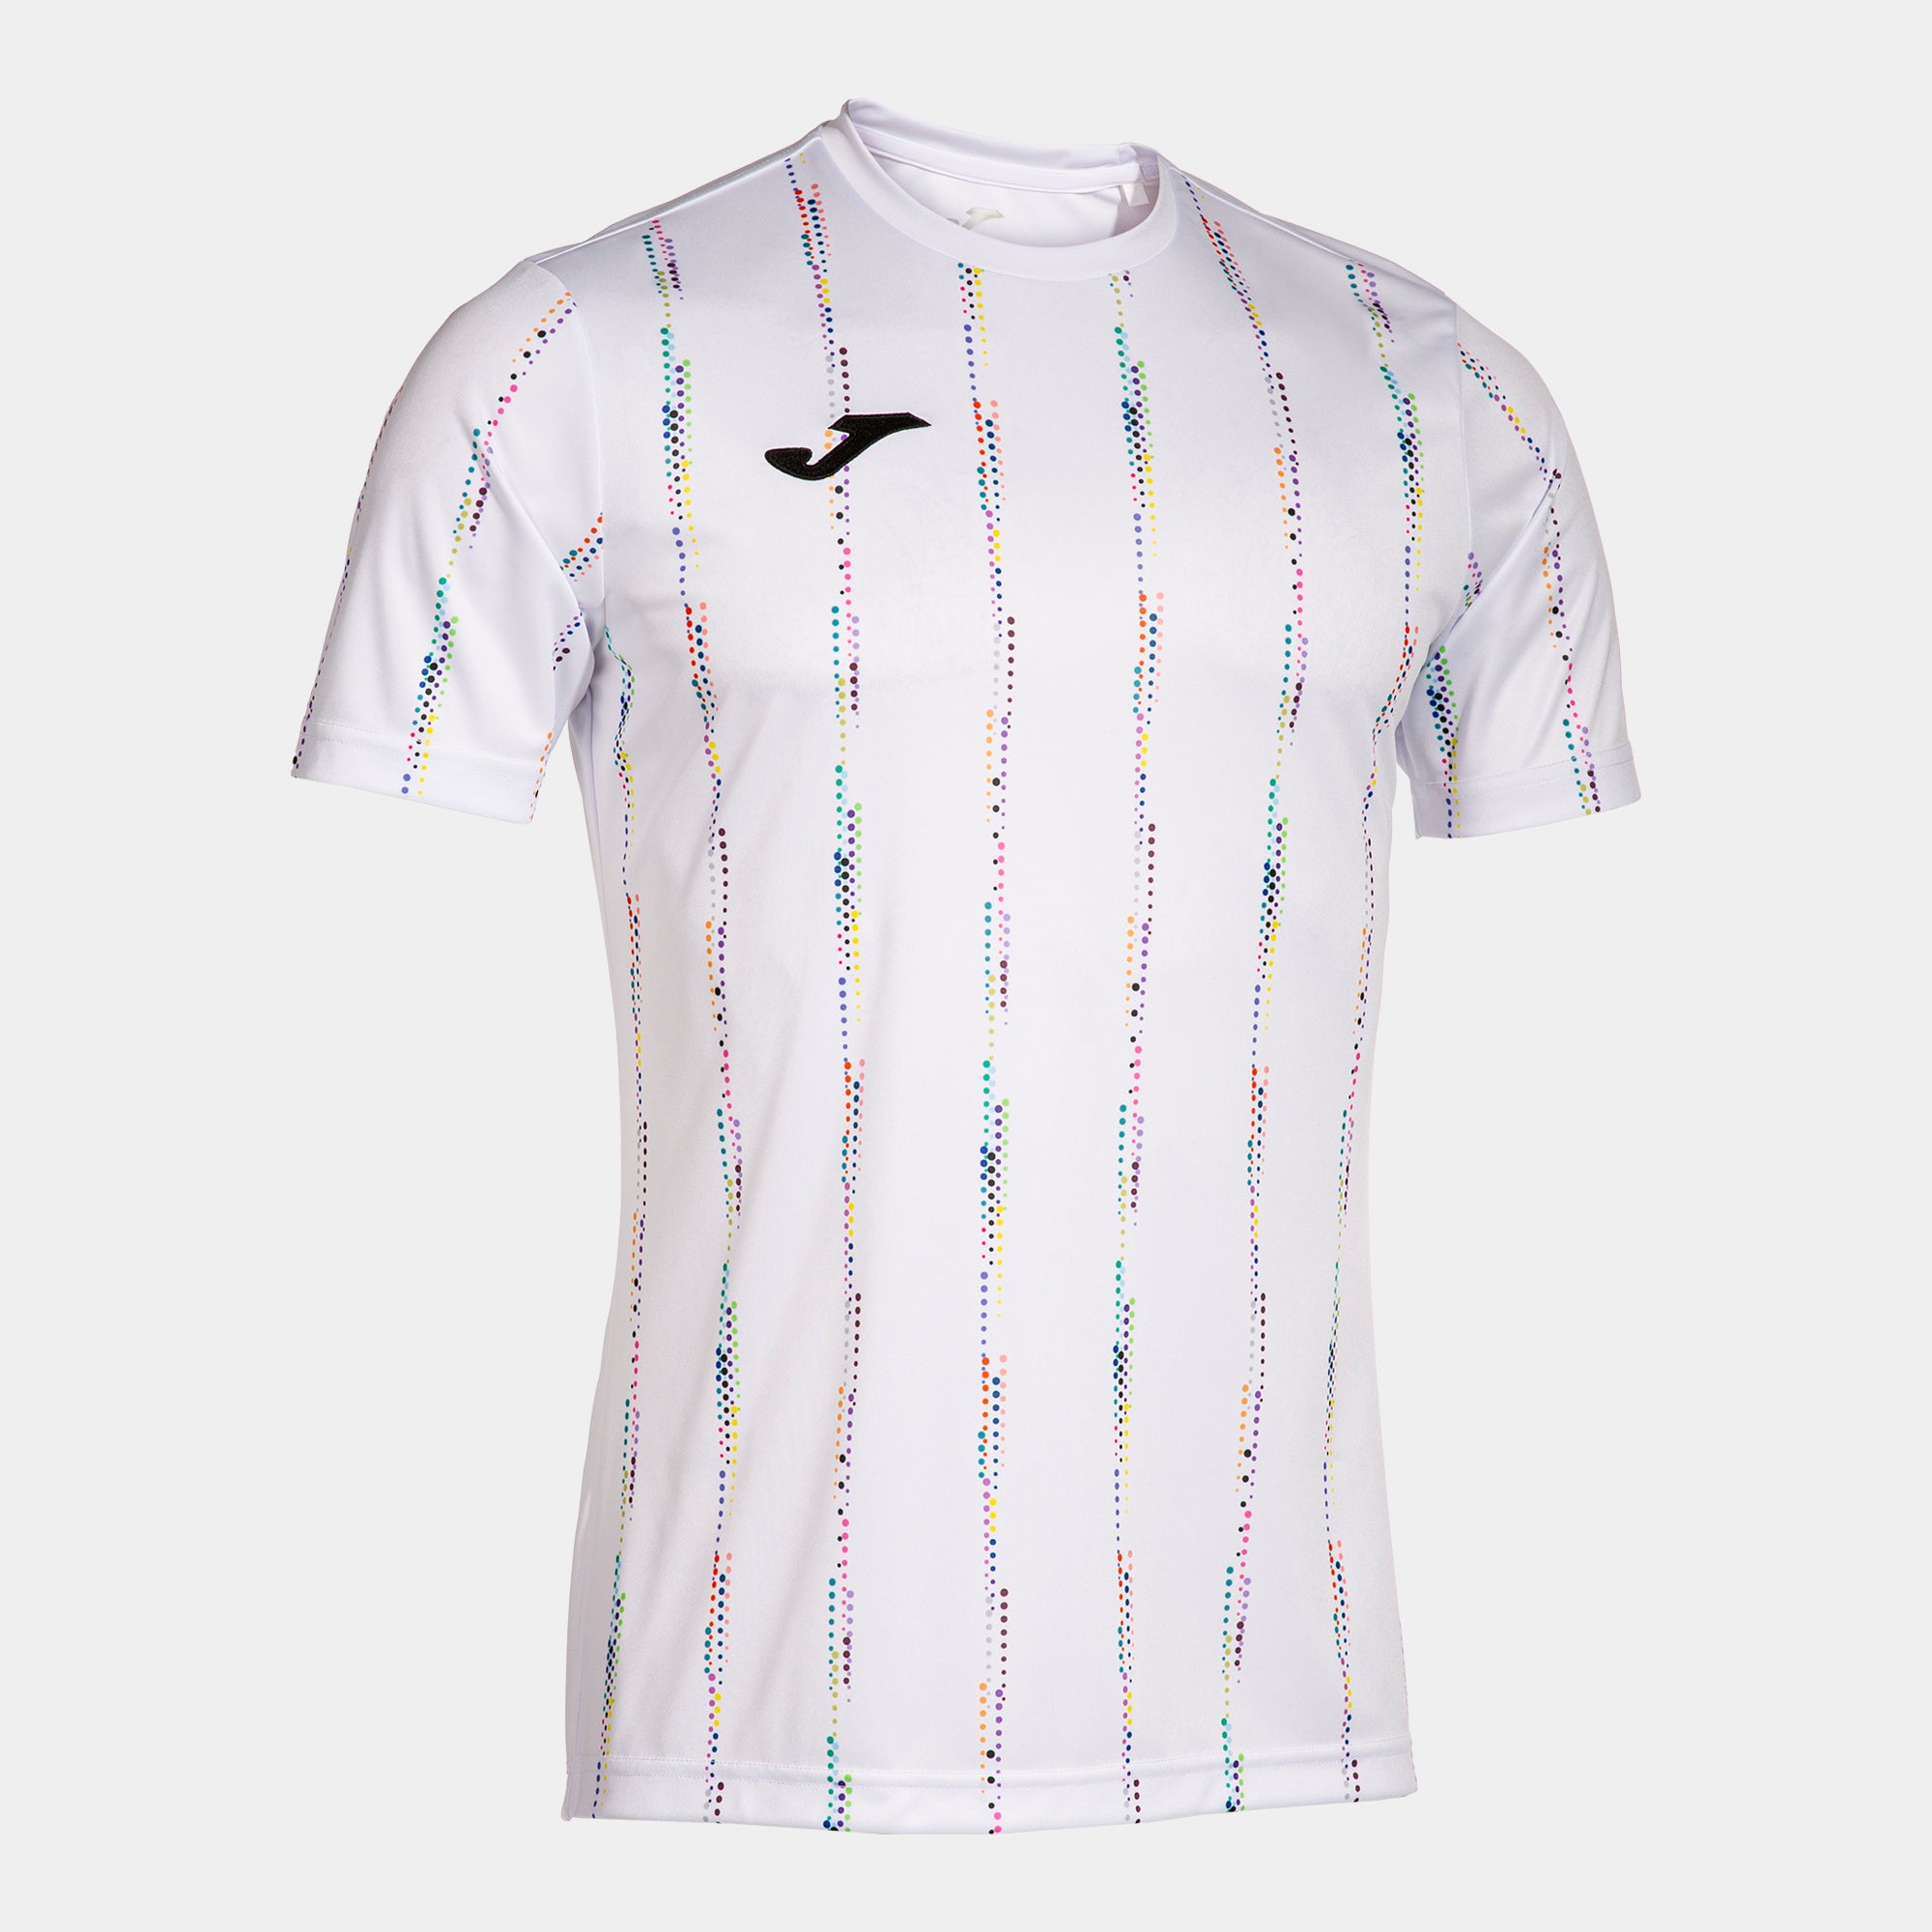 Joma ProTeam Short Sleeved T-Shirt - White